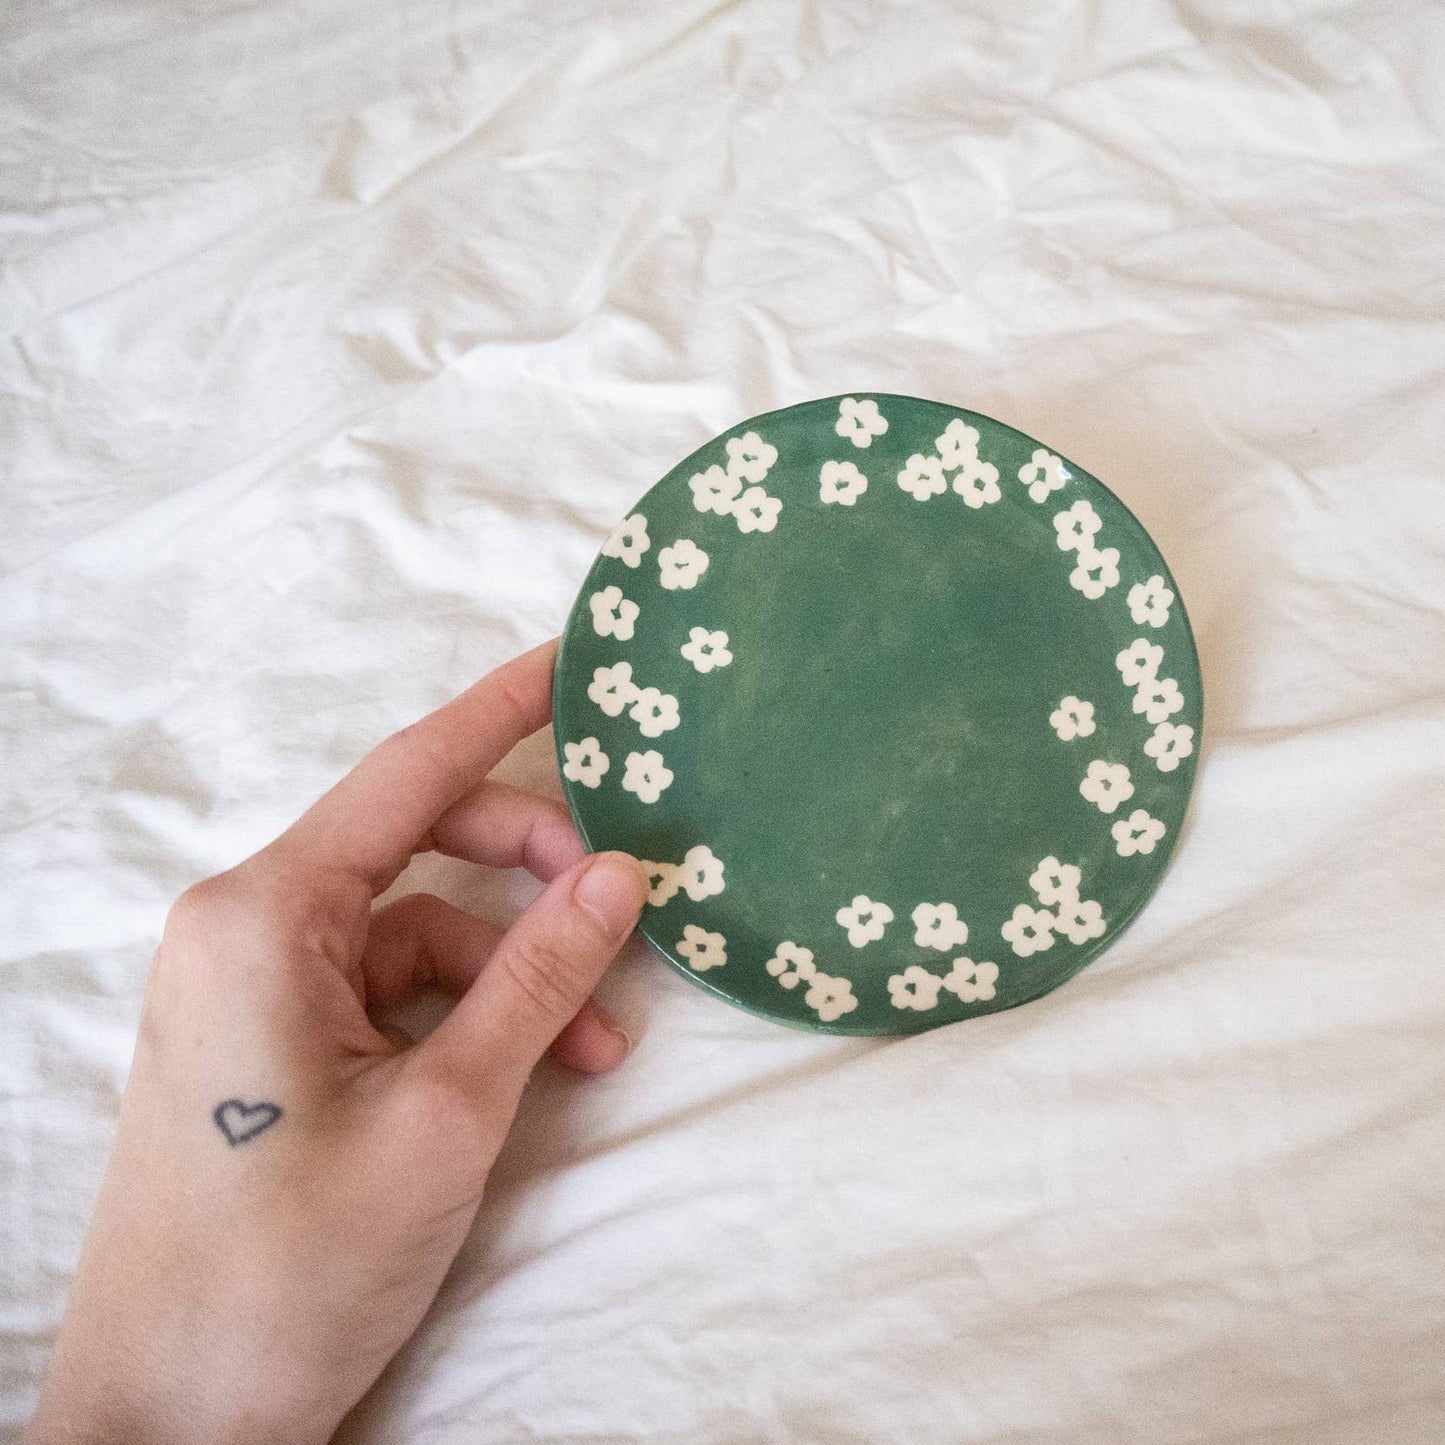 Scattered Petunia Catchall Plate by Erika Christine